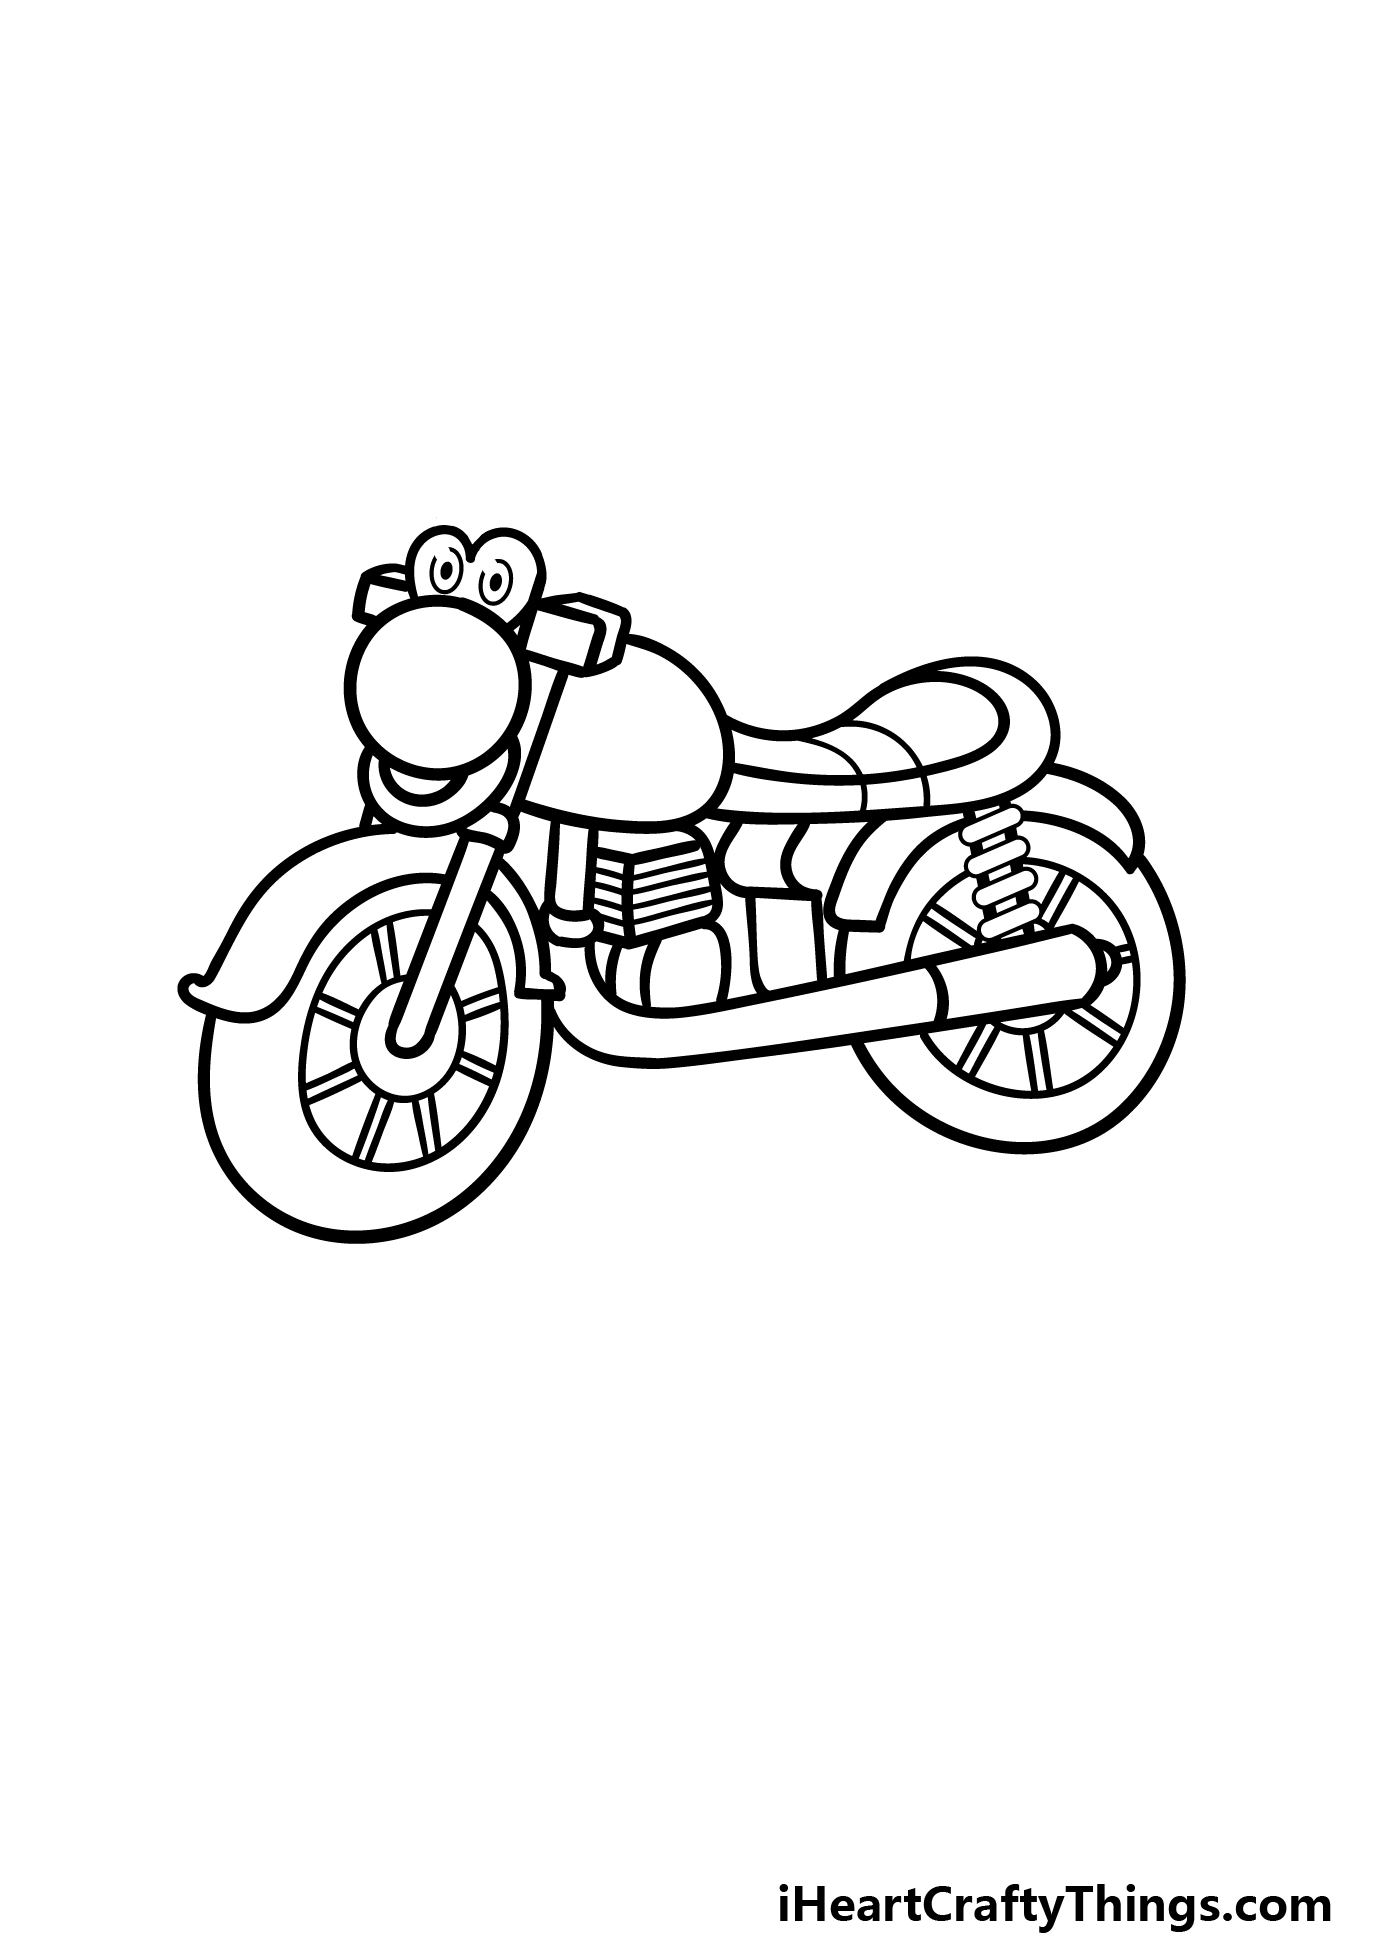 Cartoon Motorcycle Drawing - How To Draw A Cartoon Motorcycle Step By Step